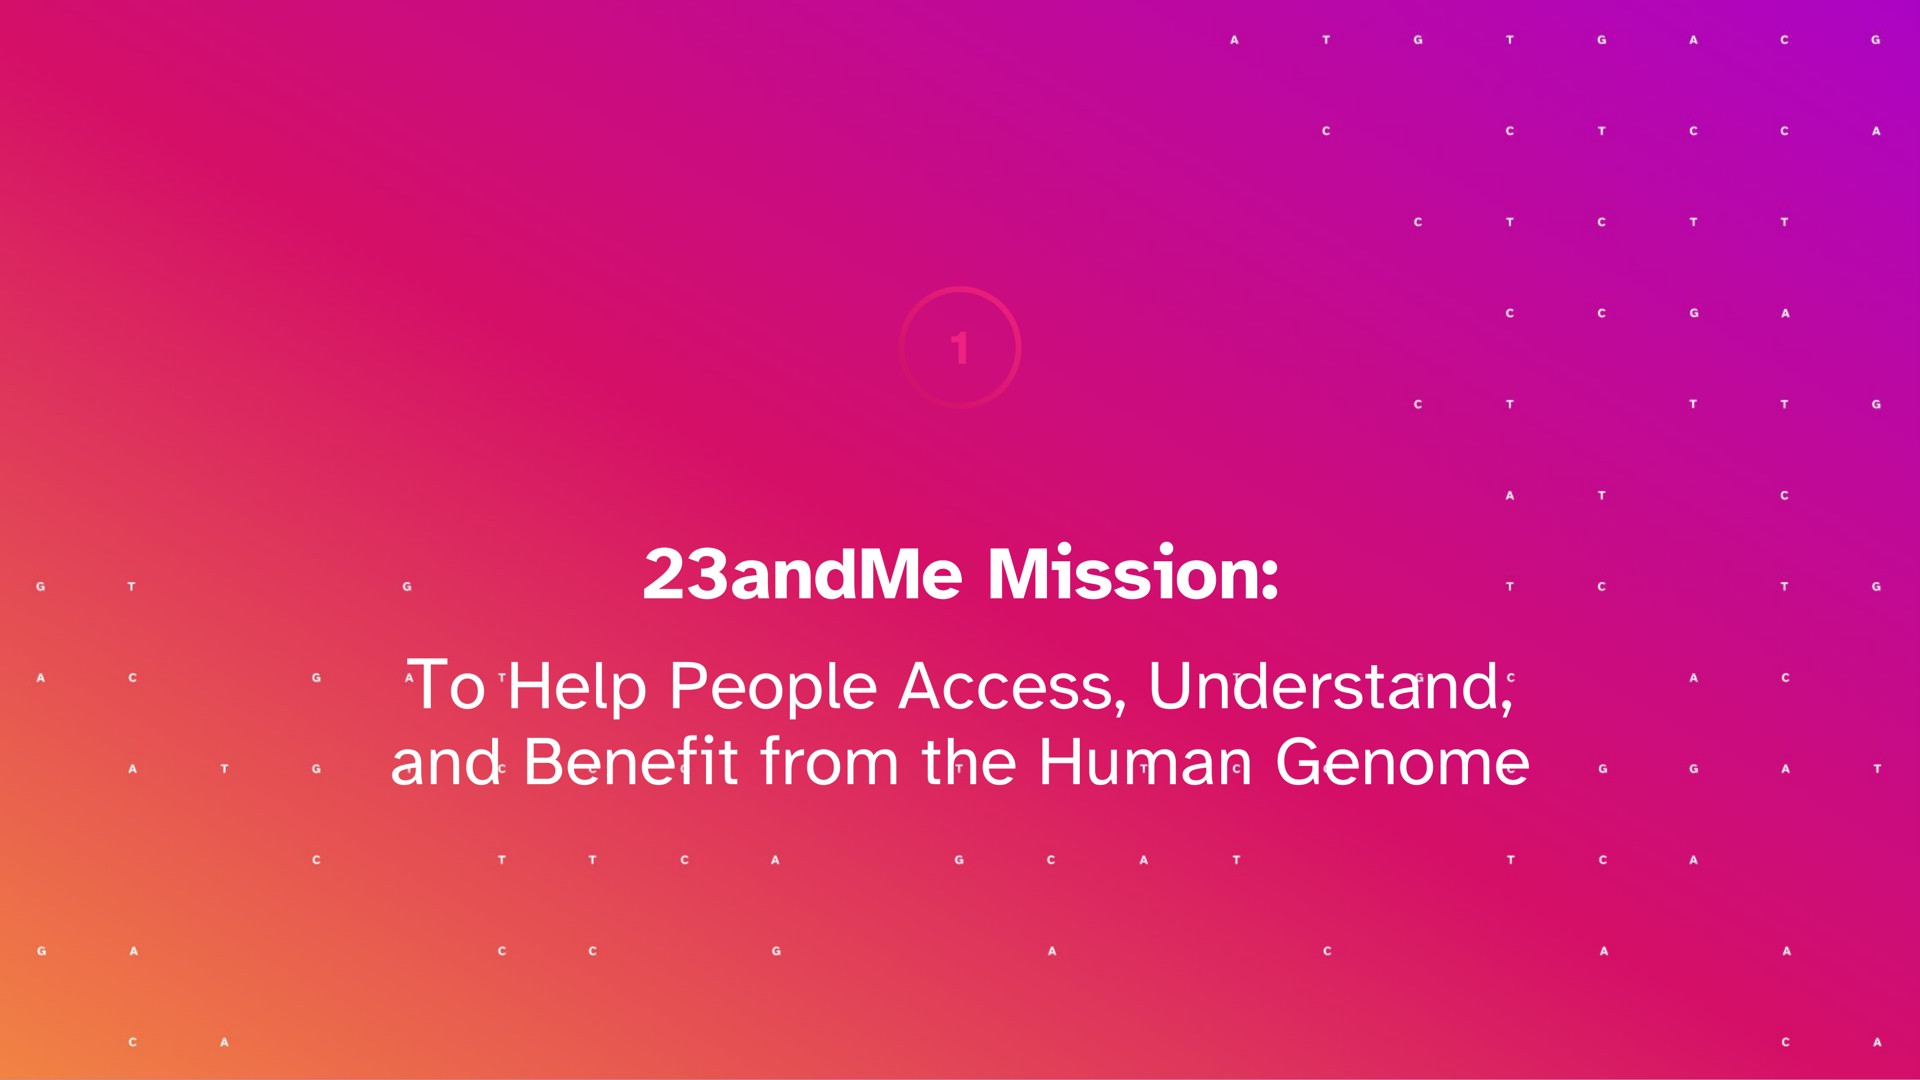 mission to help people access understand and benefit from the human genome | 23andMe